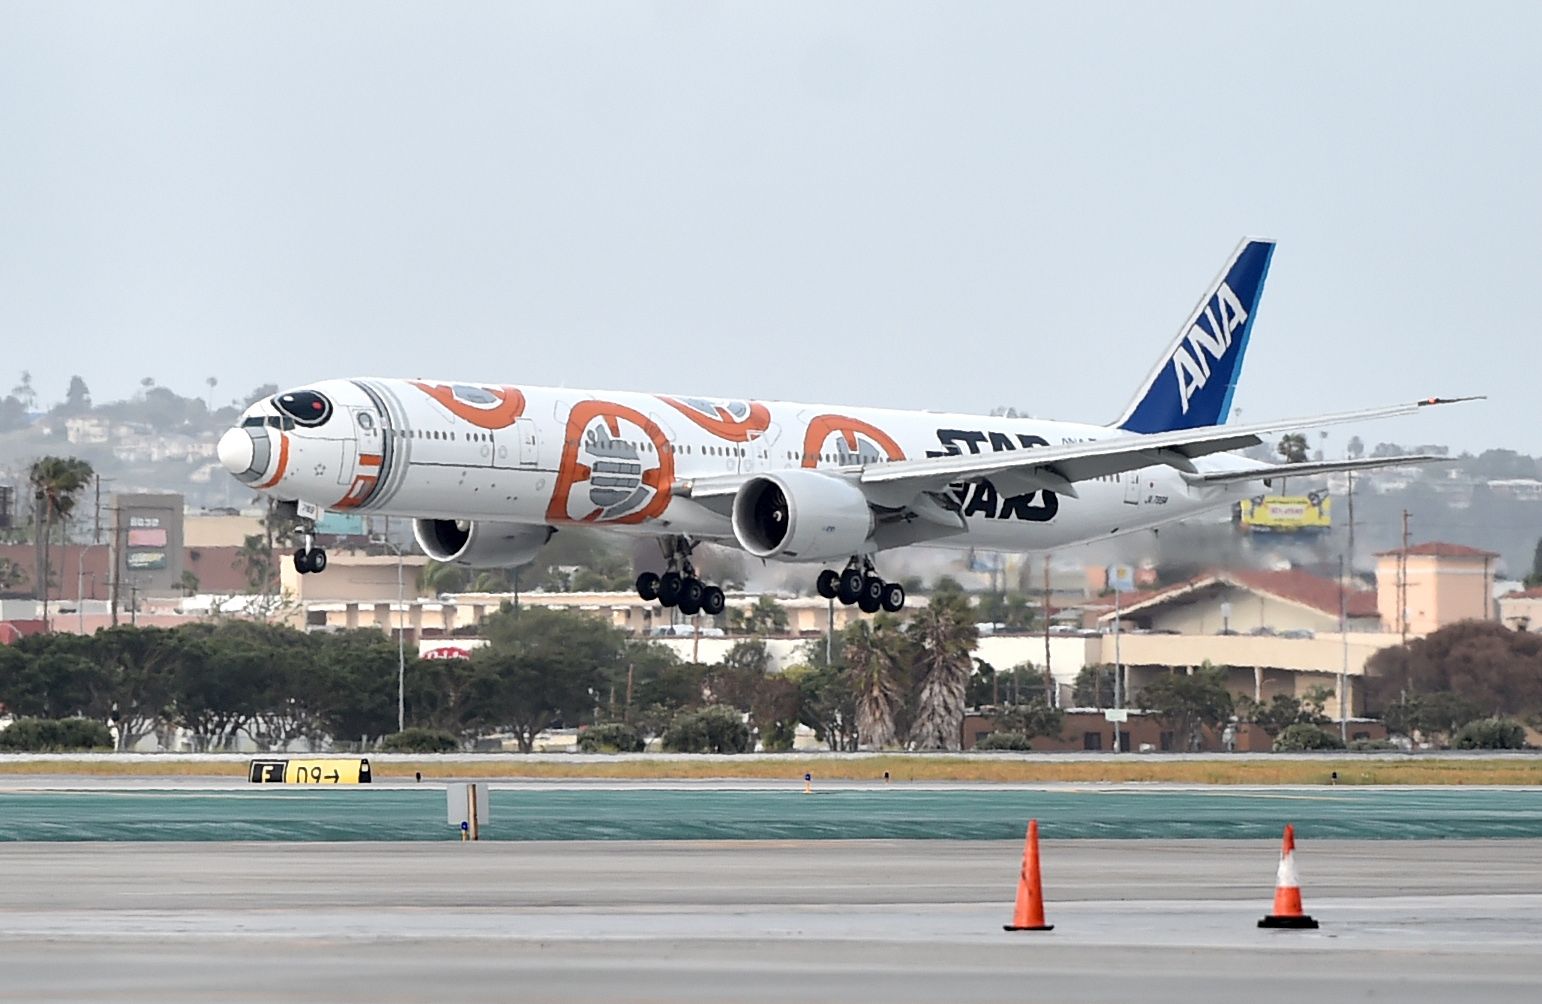 ANA To Remove Special Boeing 777 Star Wars BB-8 Livery